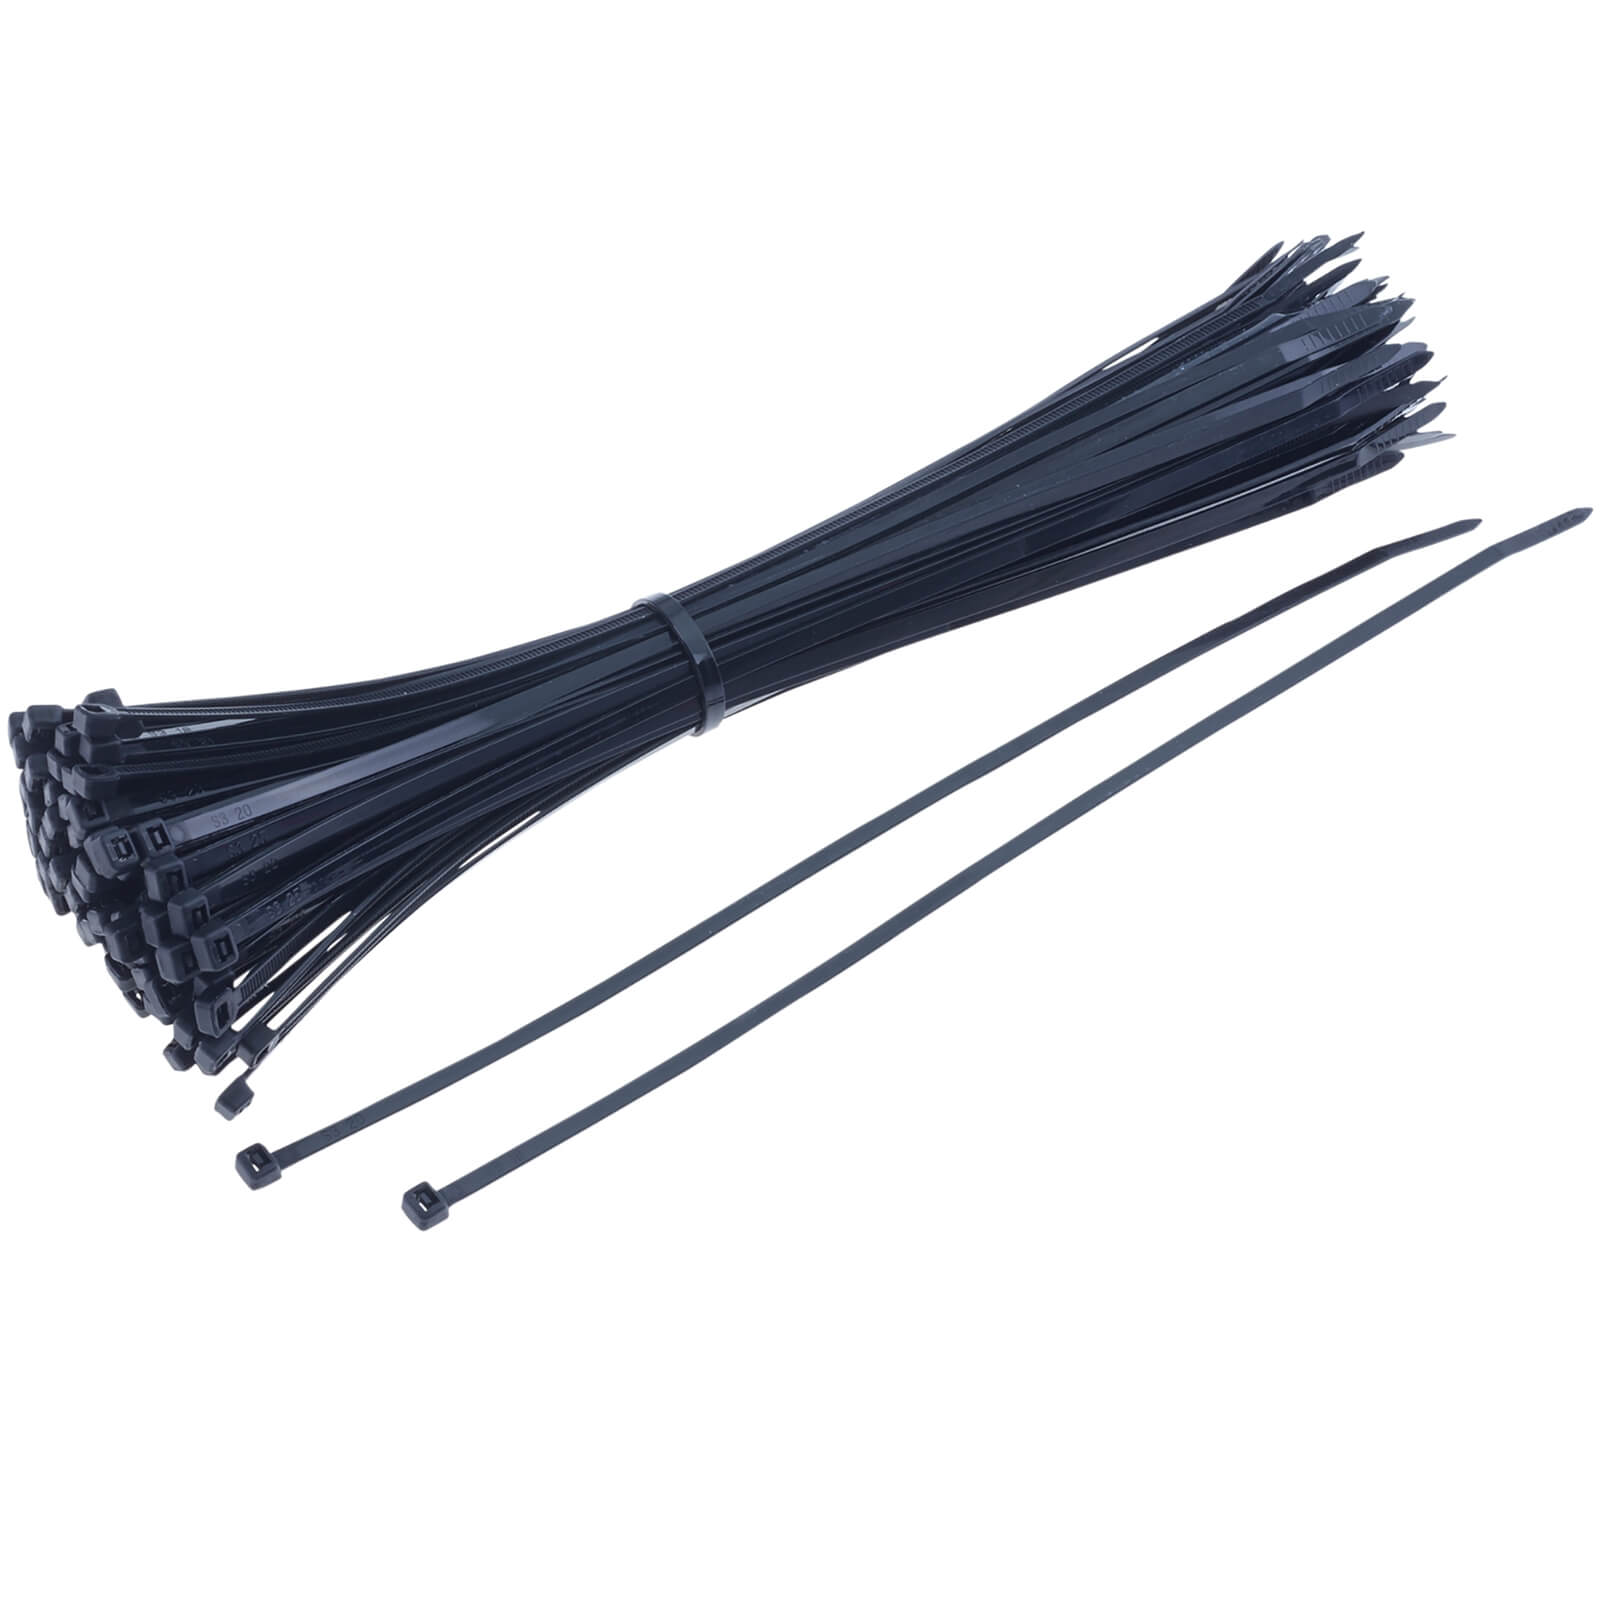 Photo of Masterplug Cable Ties 300 X 4.8mm Black 100 Pack